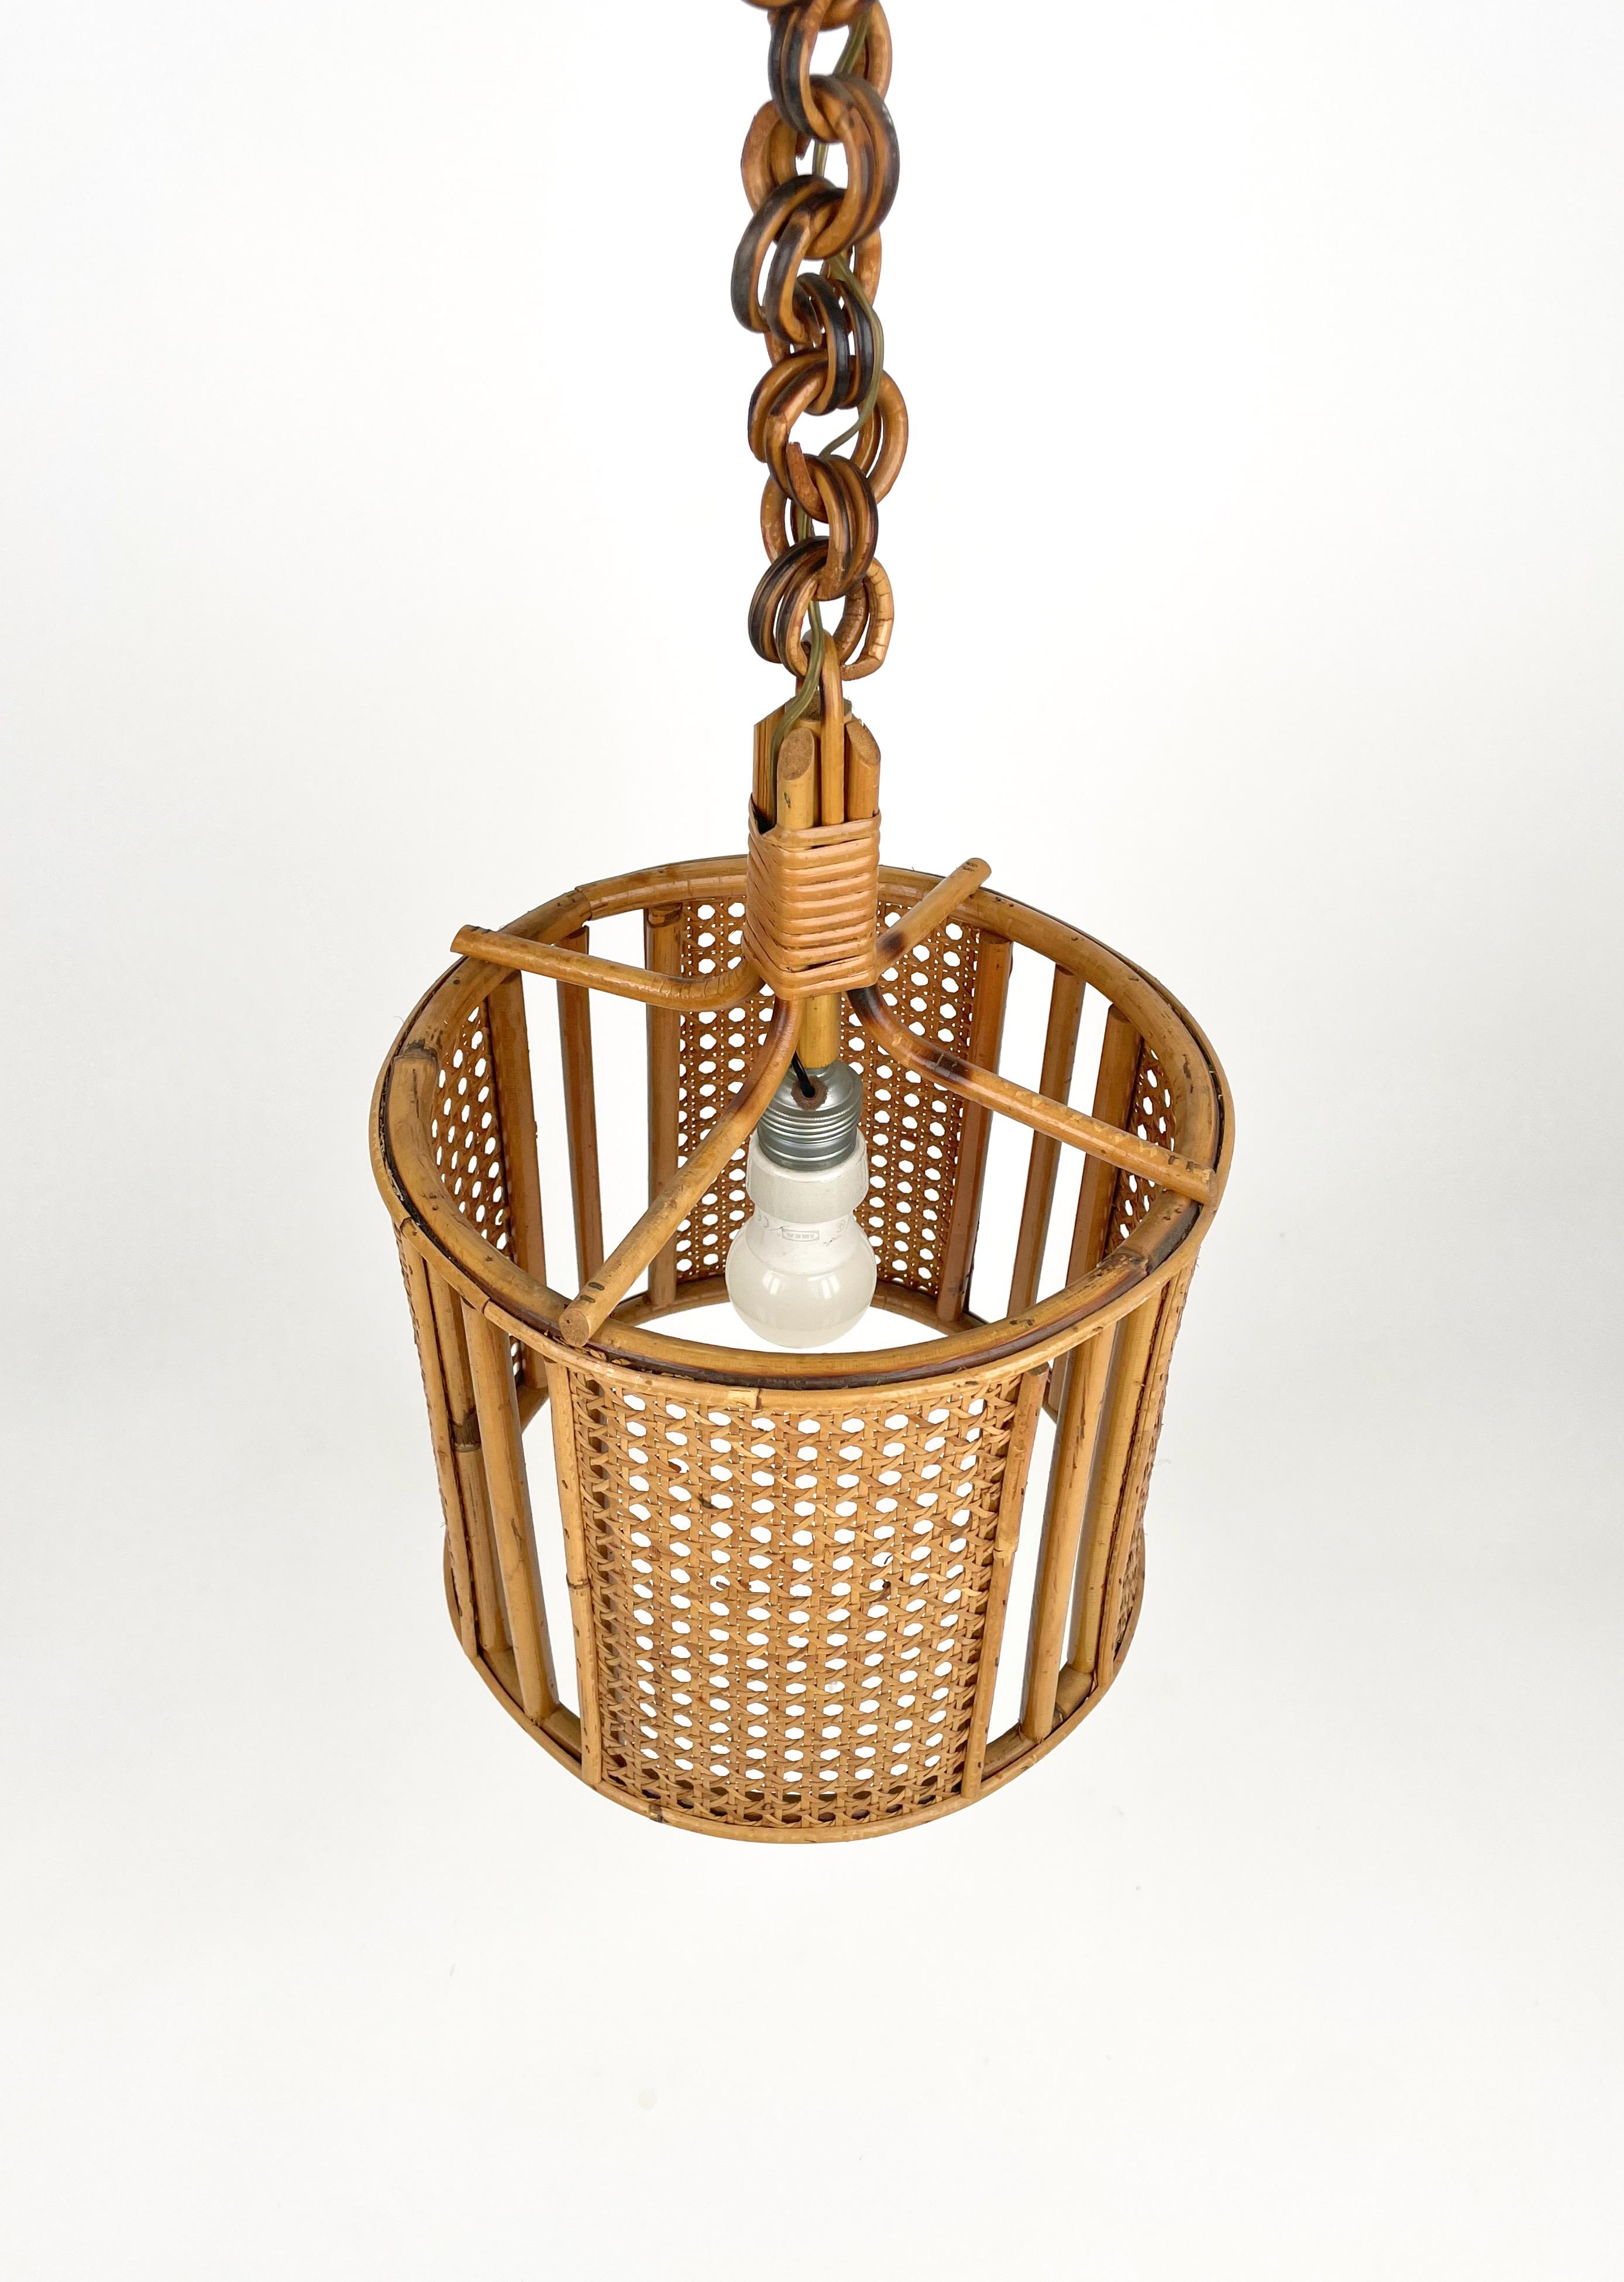 Bamboo Midcentury French Riviera Rattan and Wicker Pendent, Italy 1960s For Sale